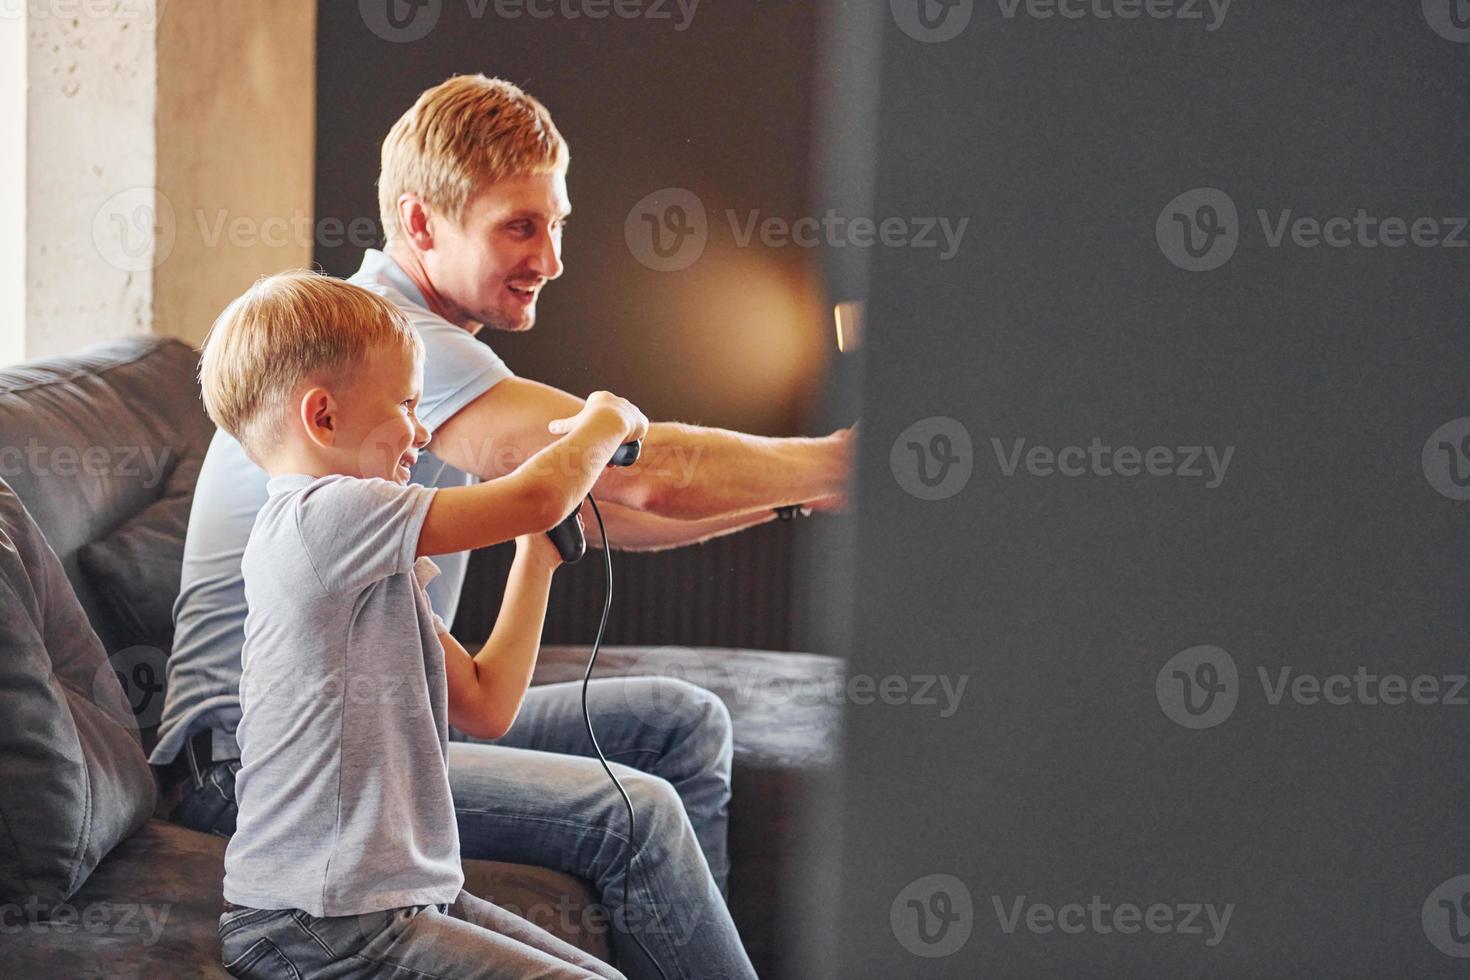 Holding video game controllers. Father and son is indoors at home together photo